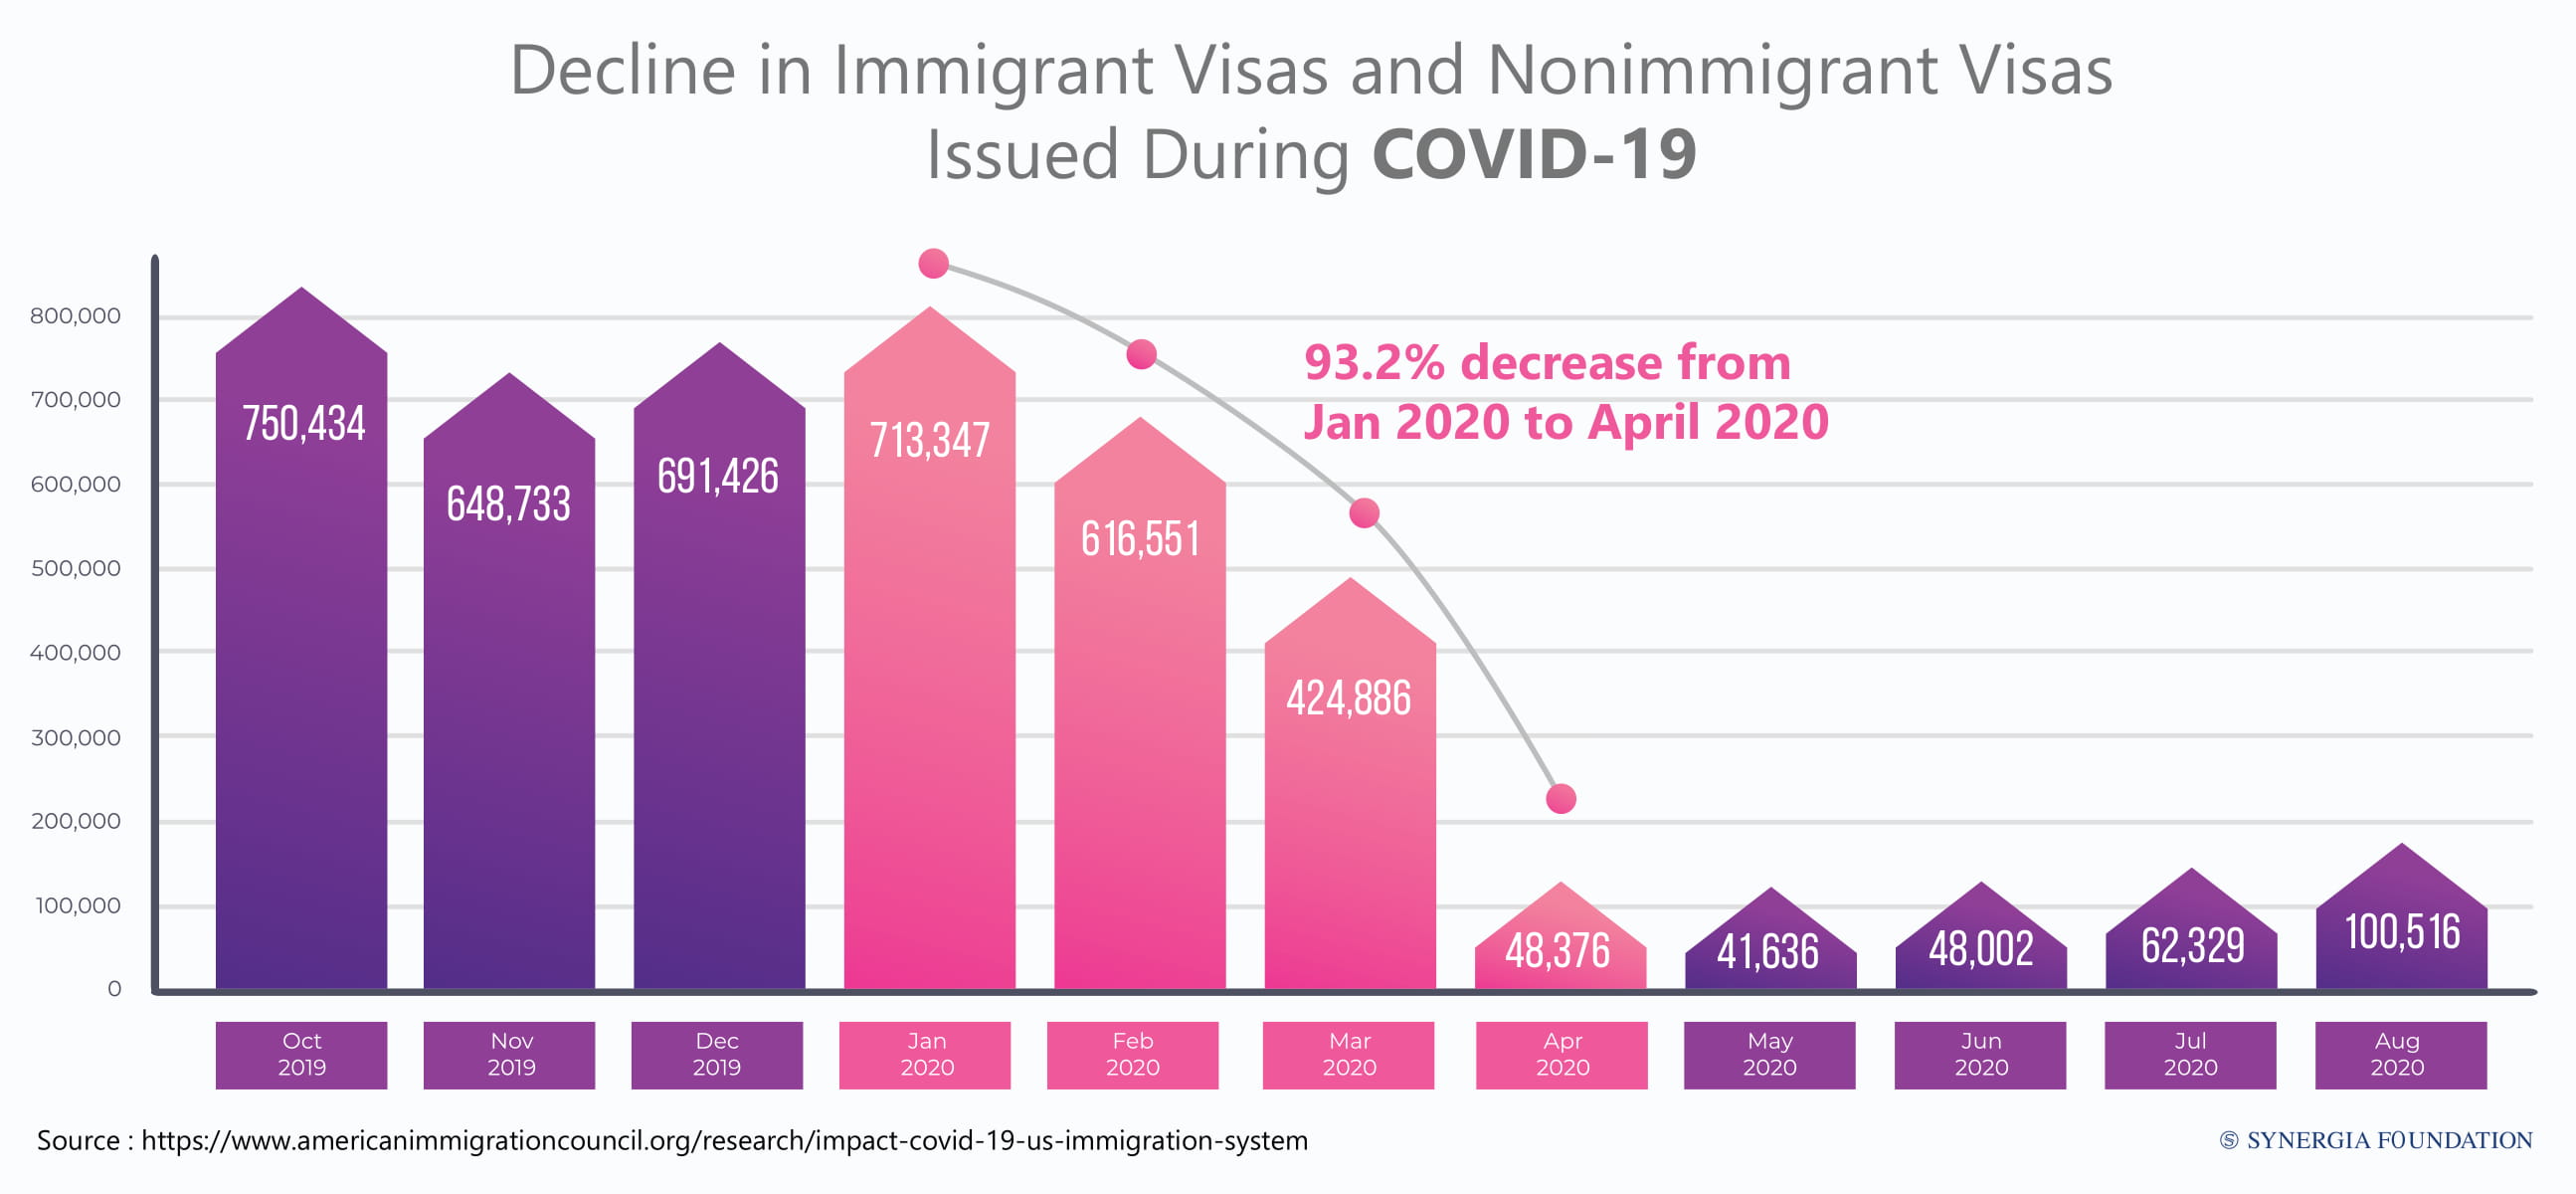 Decline in visas during COVID-19